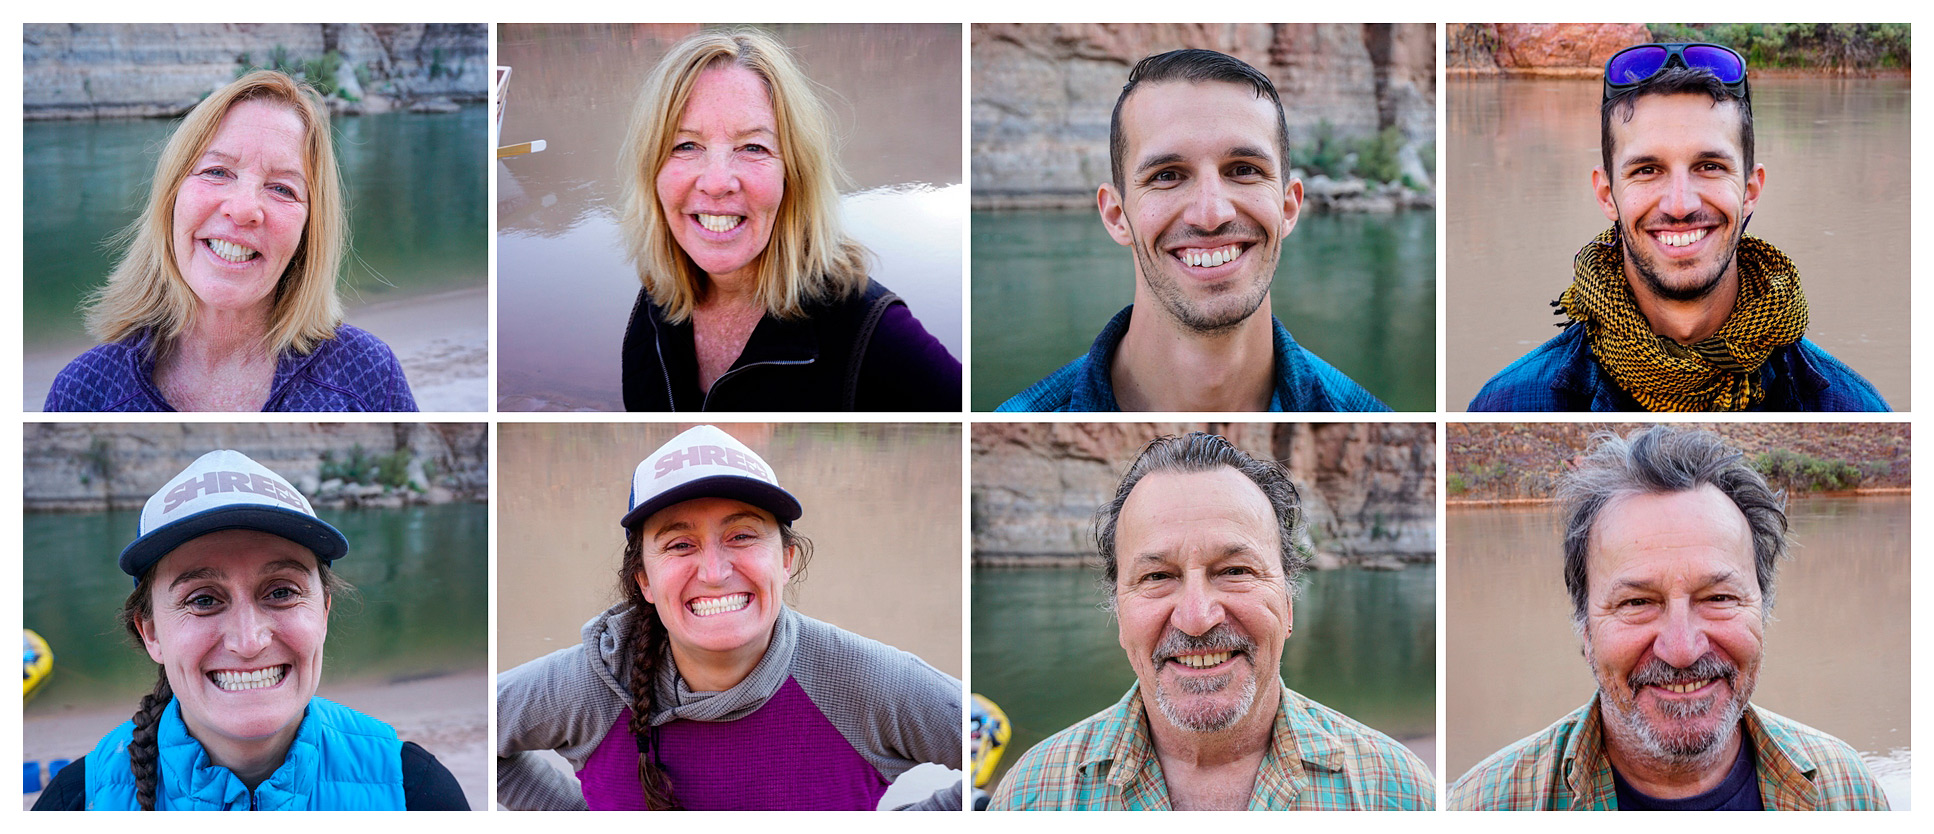 Before and After: The Transformative Magic of Grand Canyon Rafting Trip